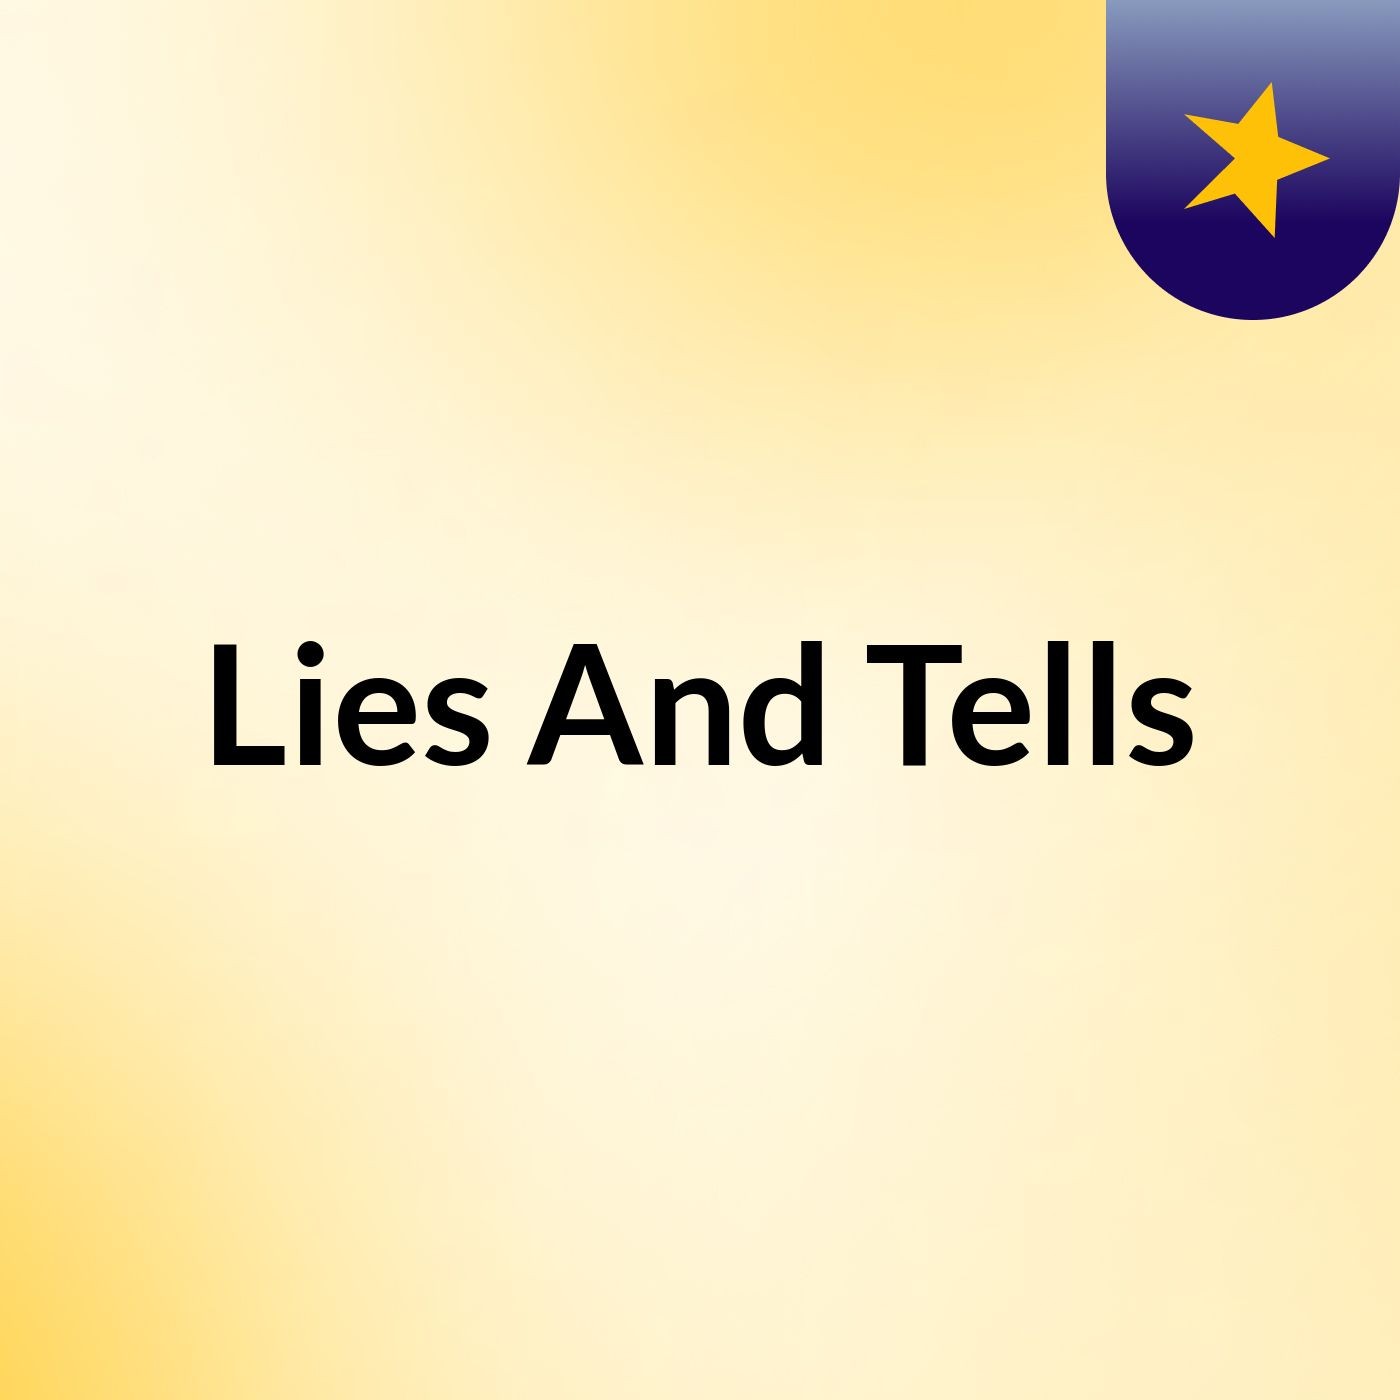 Episode 2 - Lies And Tells